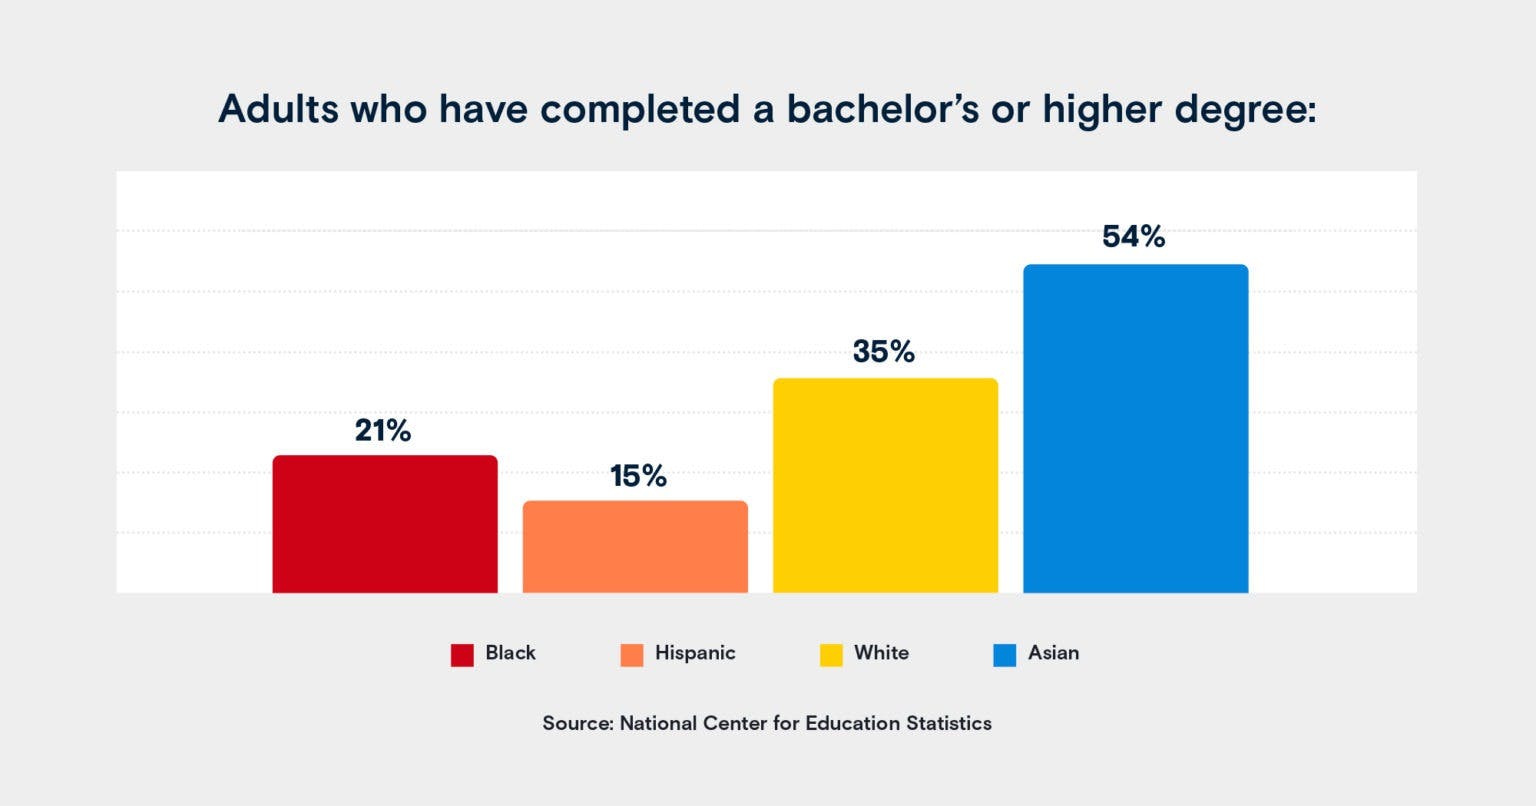 statistic on adults who have completed a bachelor's degree